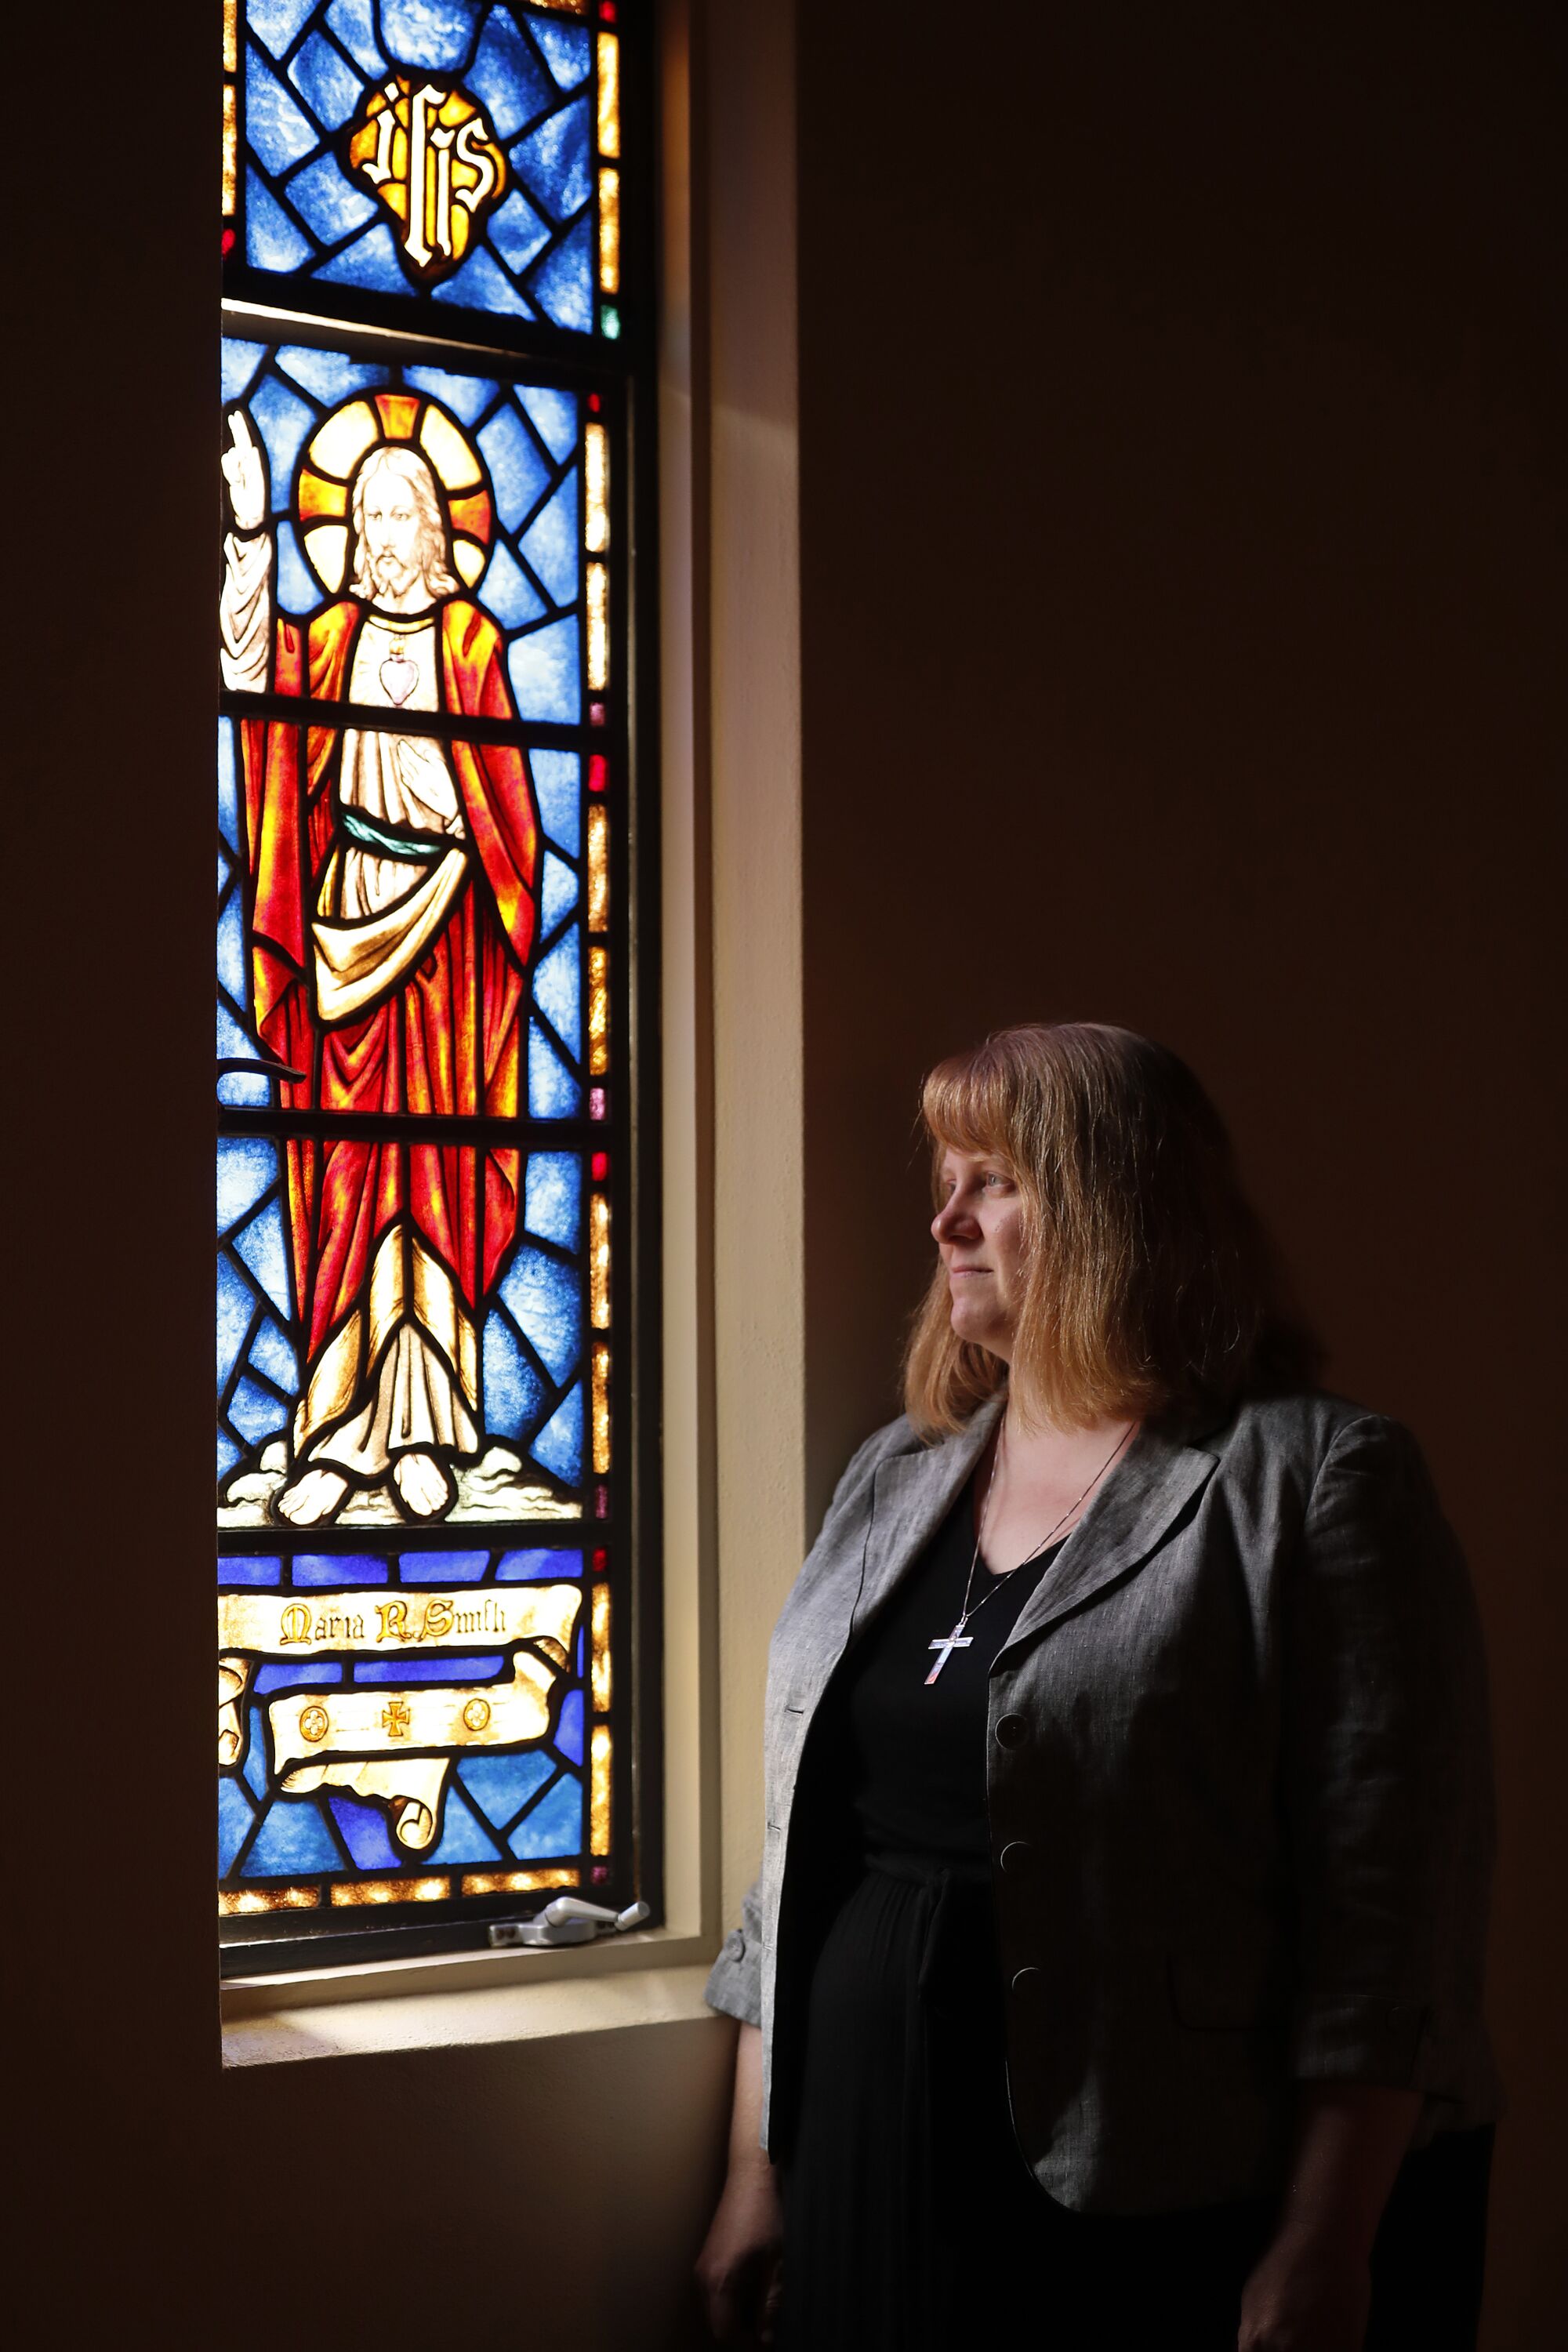 Sister Juliet Mousseau, an administrator at the Franciscan School of Theology at the University of San Diego.